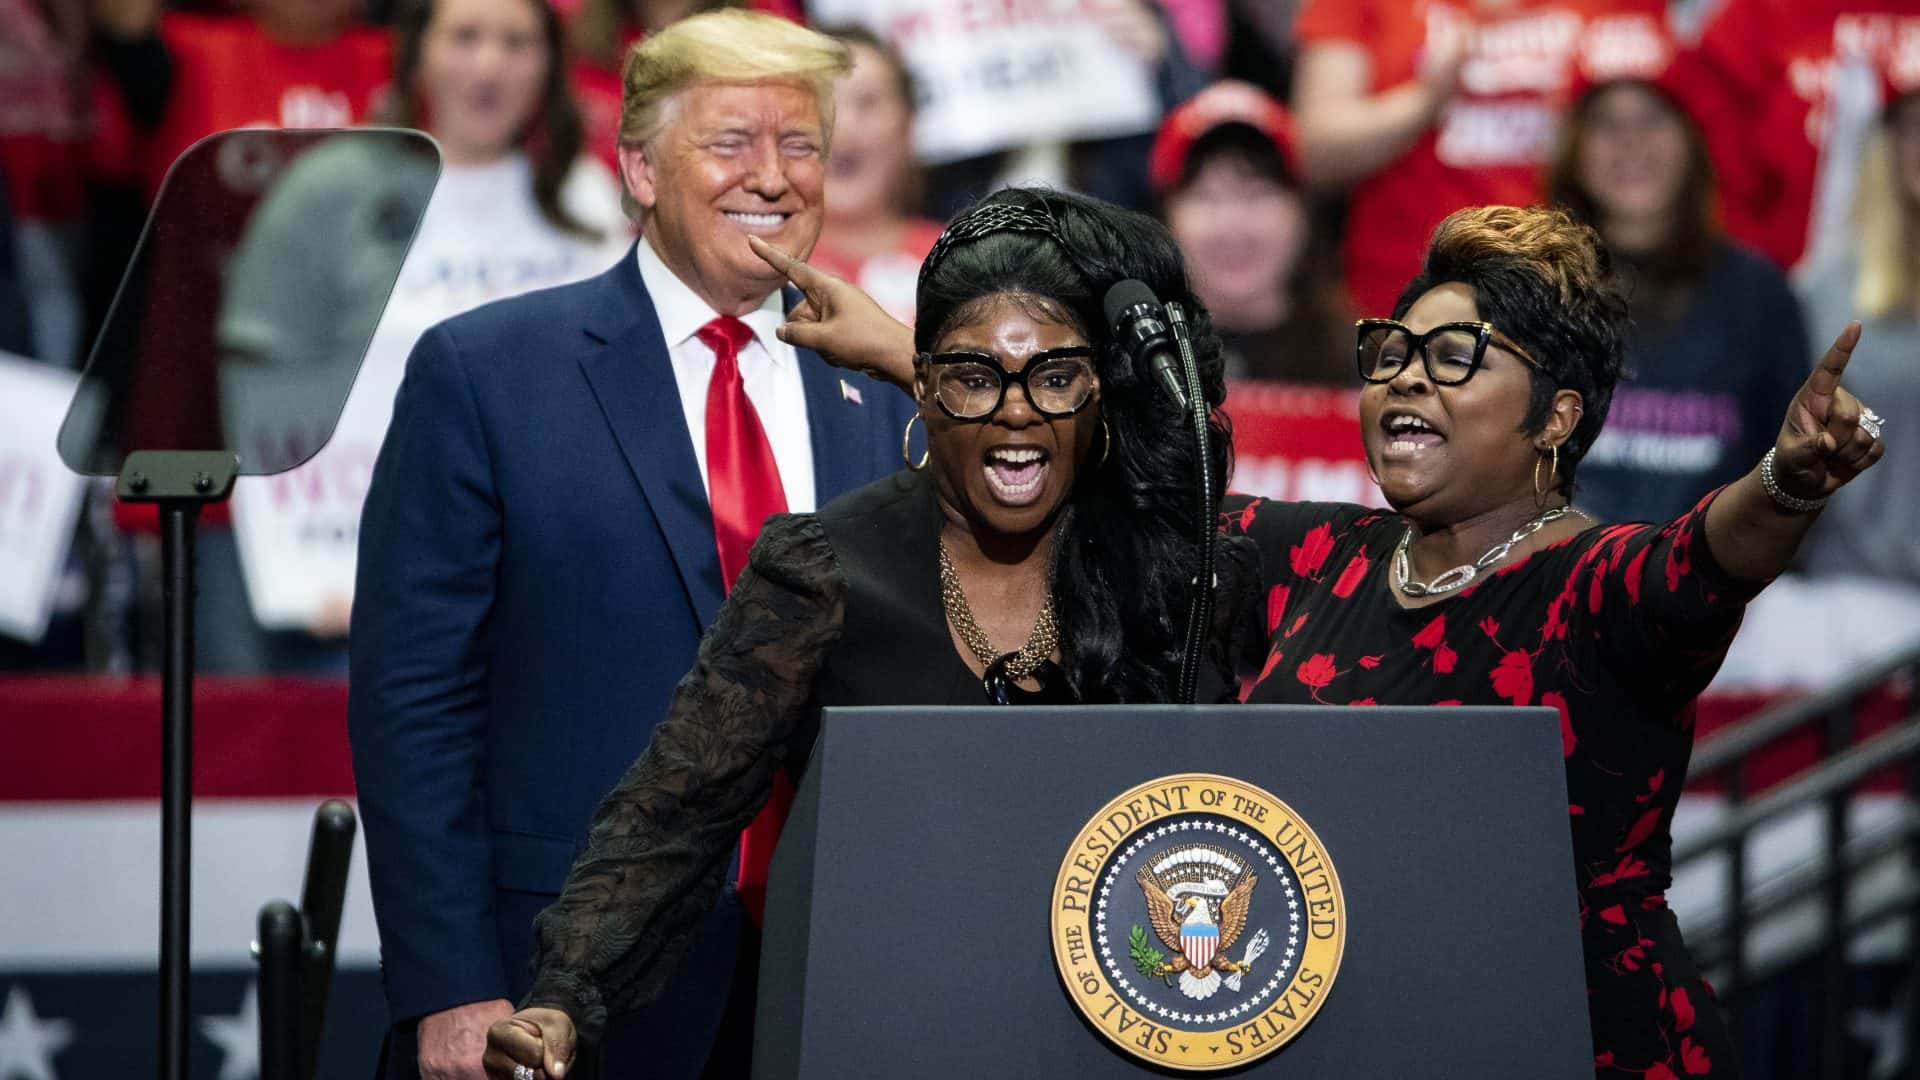 Lynette Hardaway (front) with Donald J Trump (back) and sister Rochelle Richardson (right)